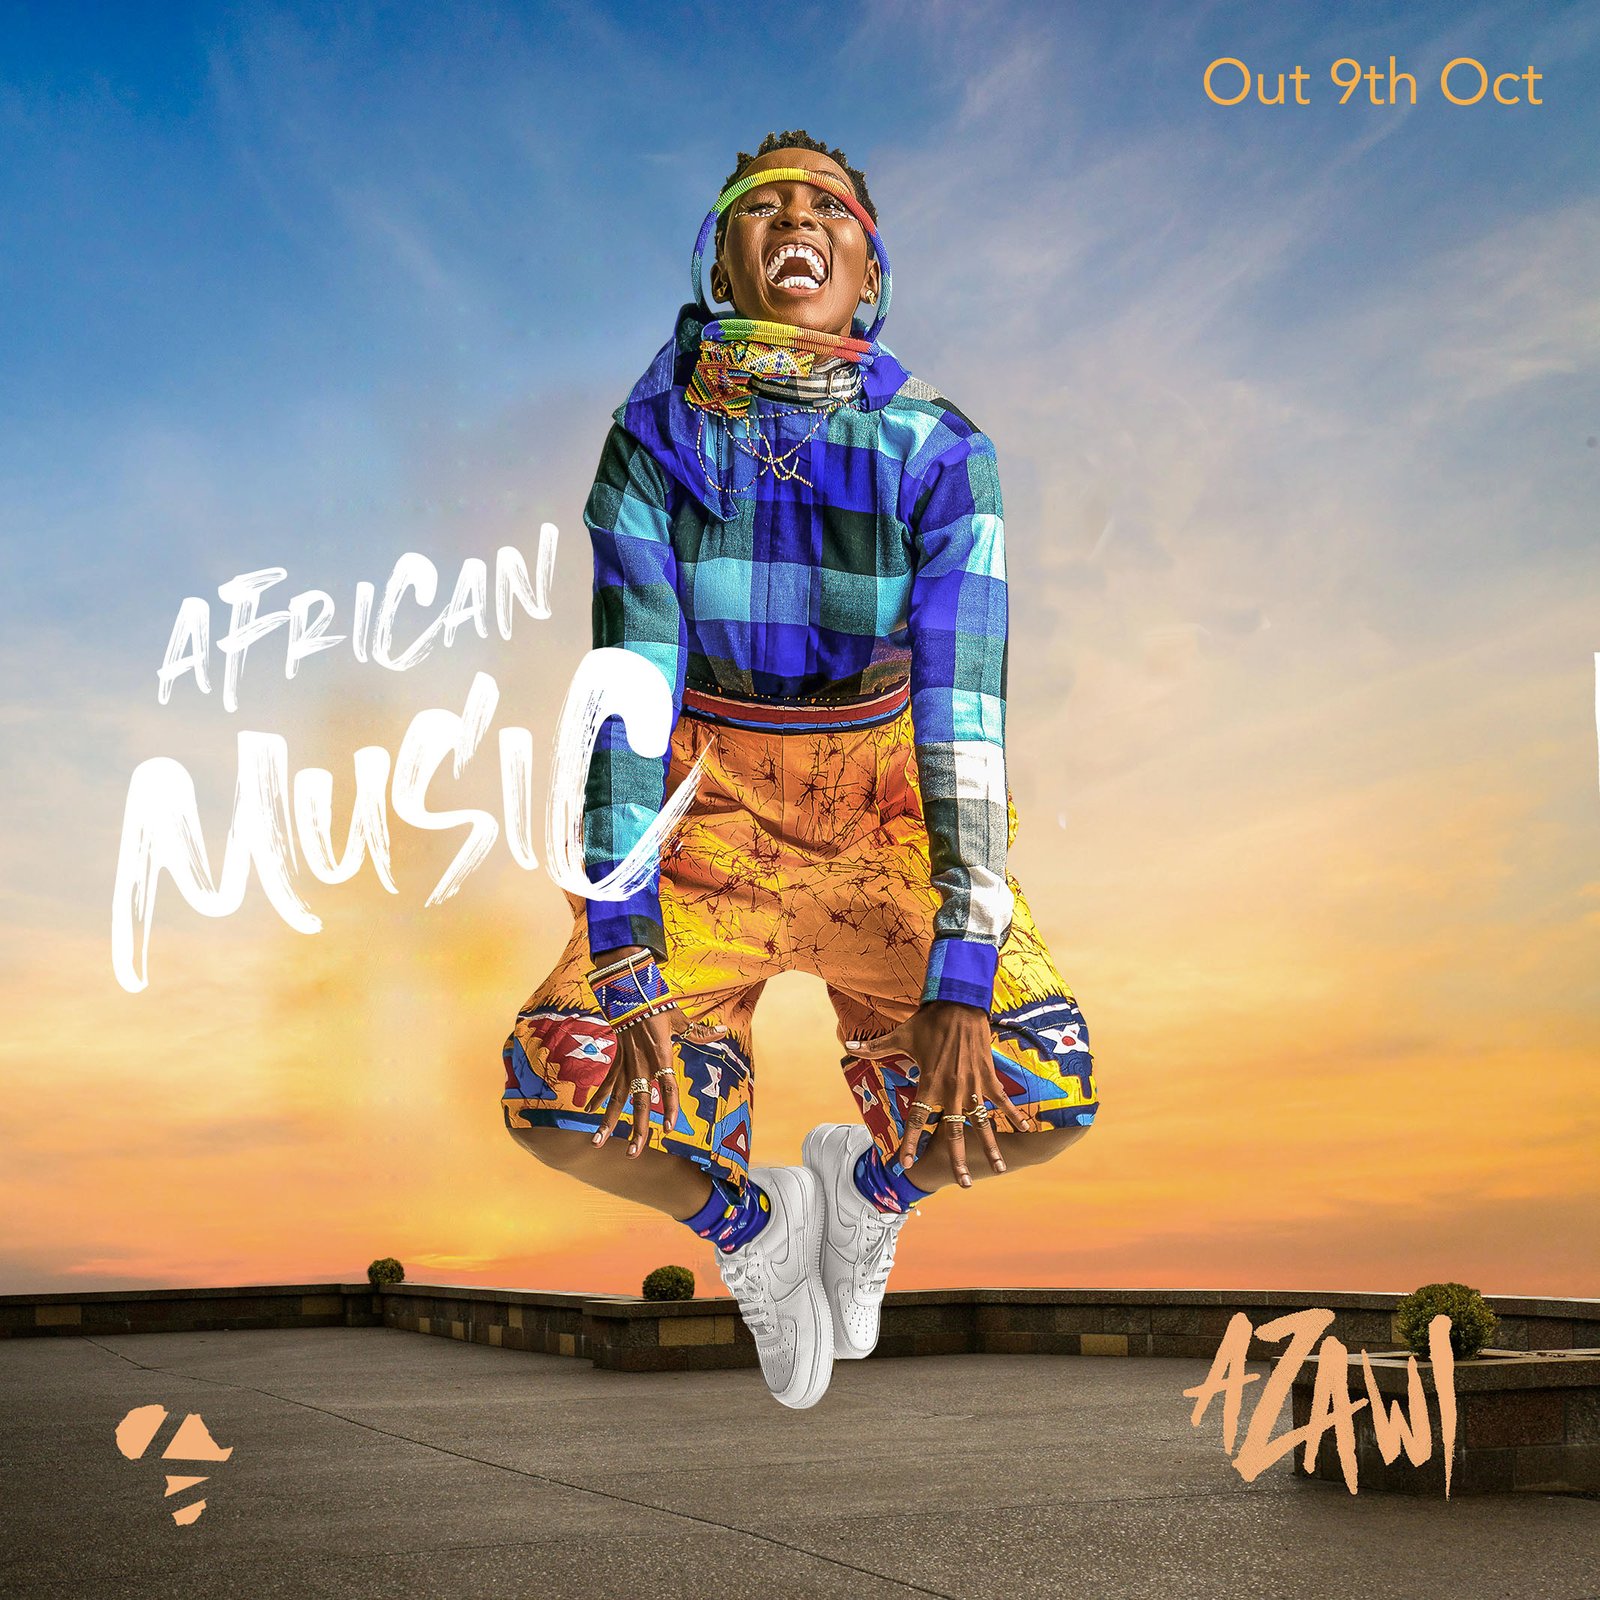 Azawi releases album Artwork and release date which is 9th October, Uganda’s Independence Day.